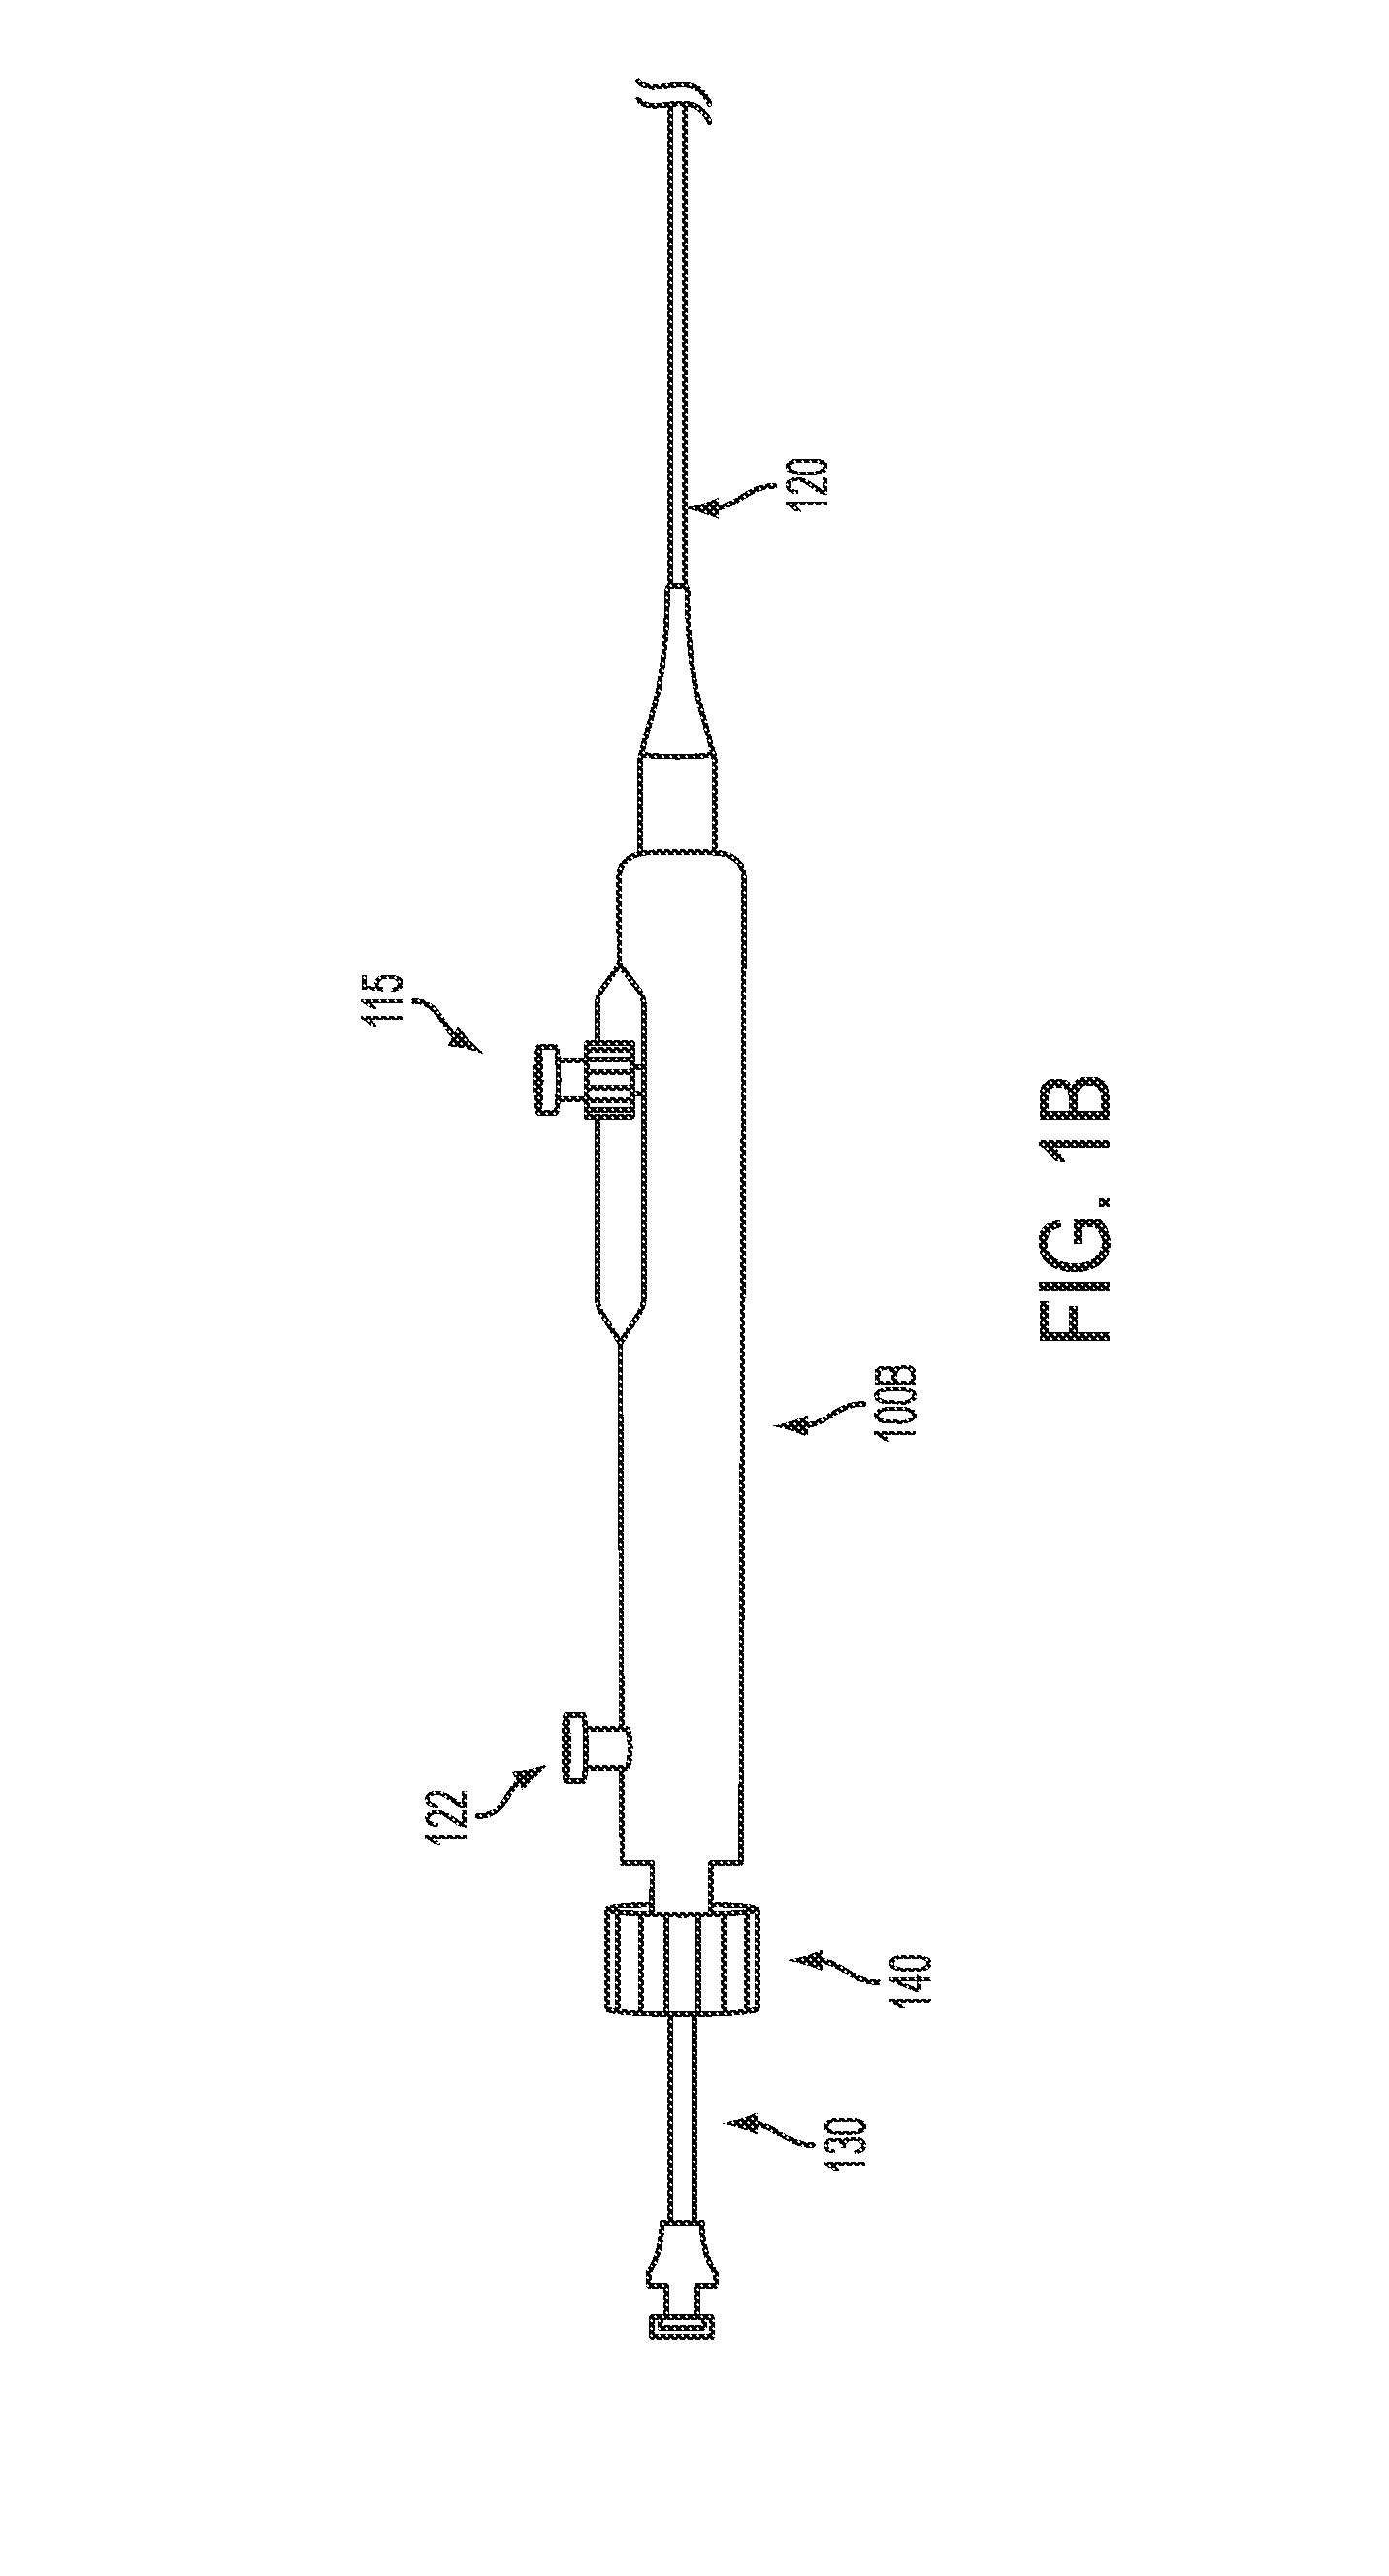 Method and apparatus for centering a microcatheter within a vasculature